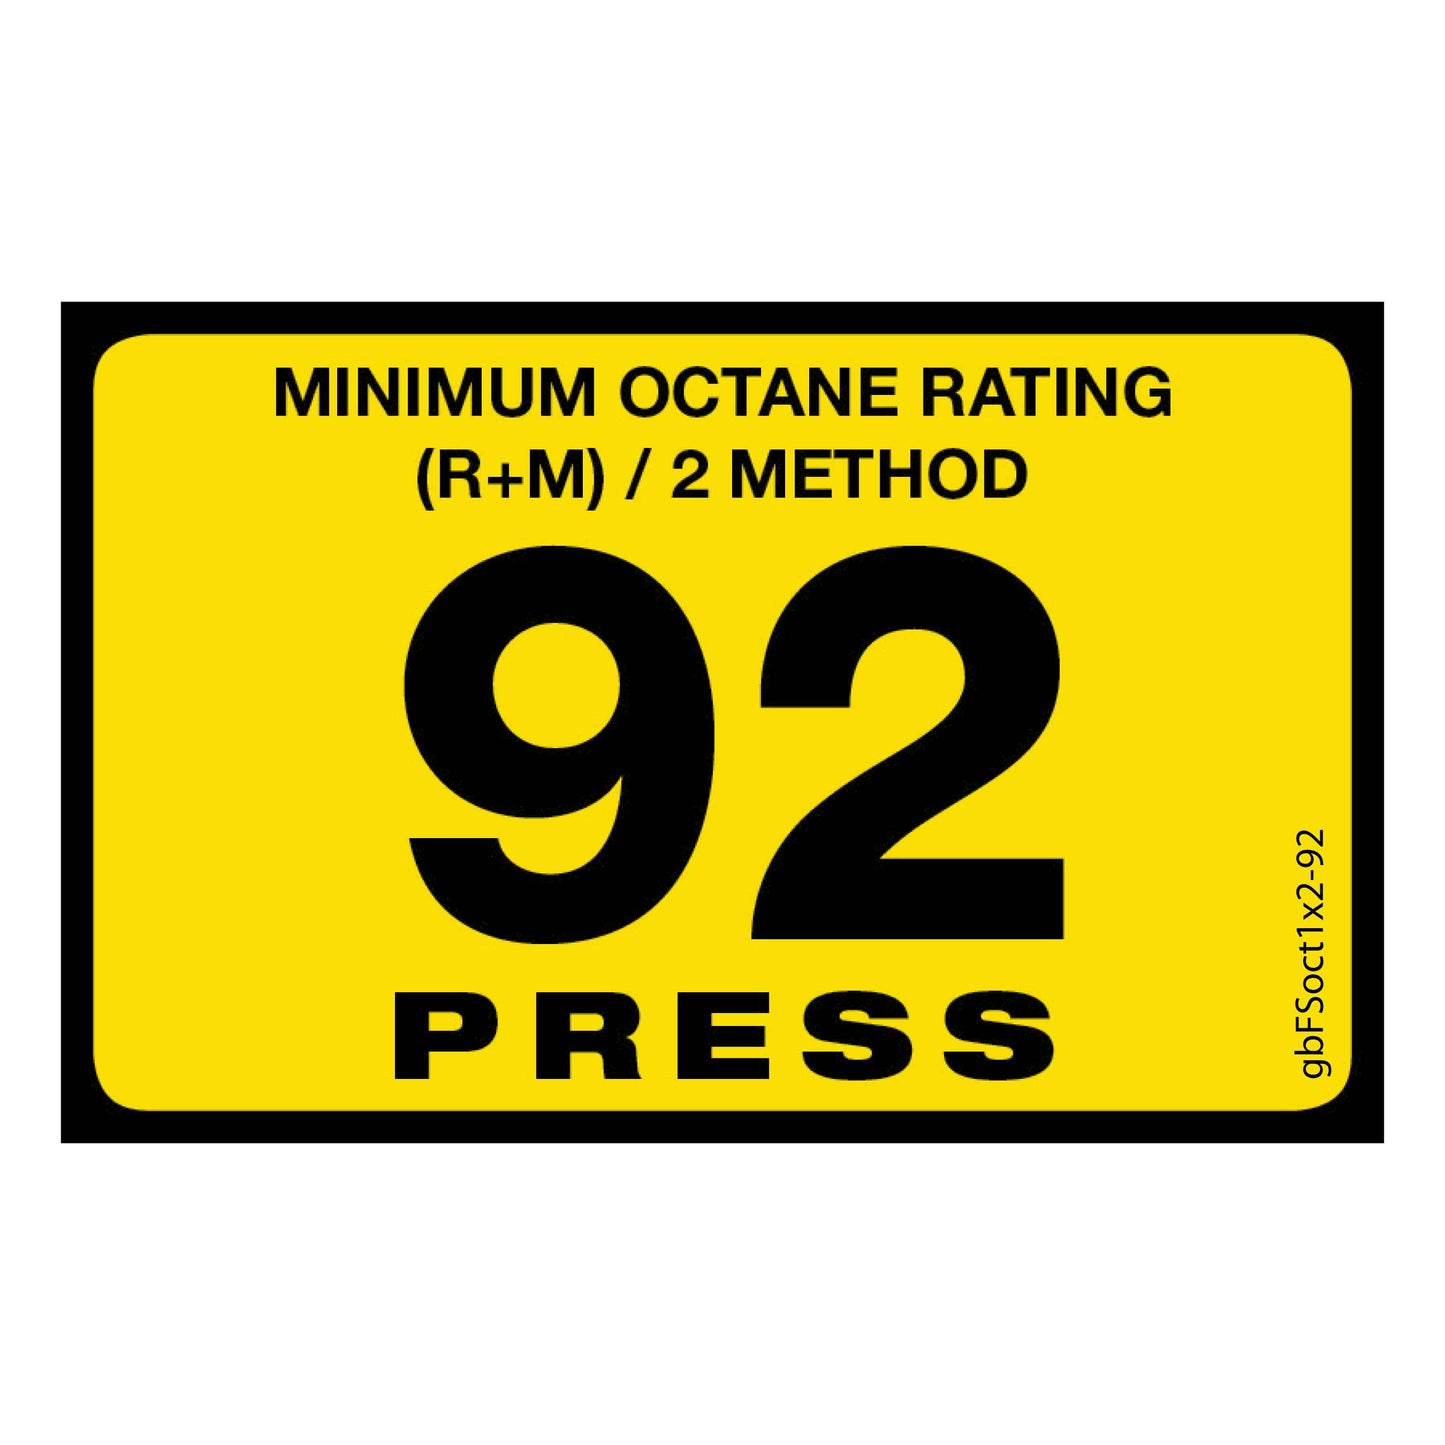 92 Press Octane Rating Decal. 1 inch by 2 inches in size. 